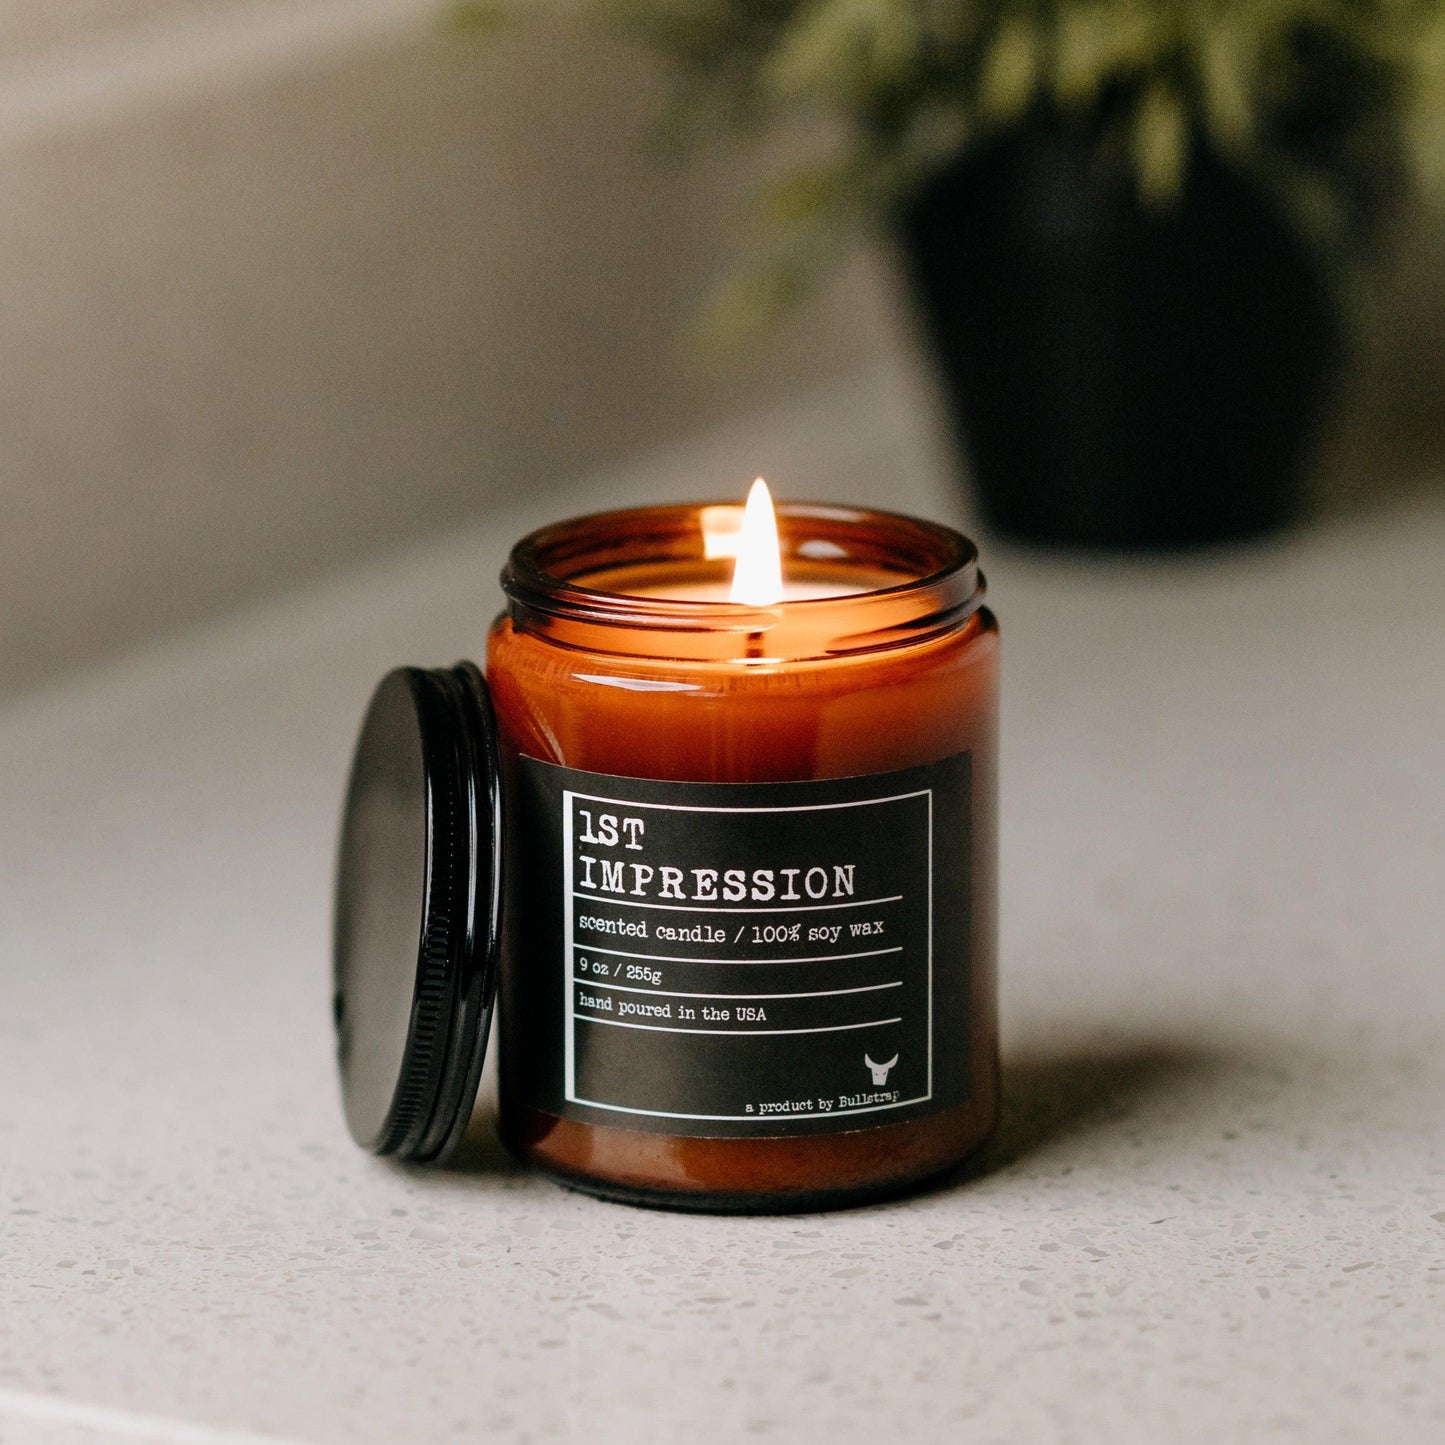 1st Impression Candle (9 Ounce) by Bullstrap - The Hammer Sports